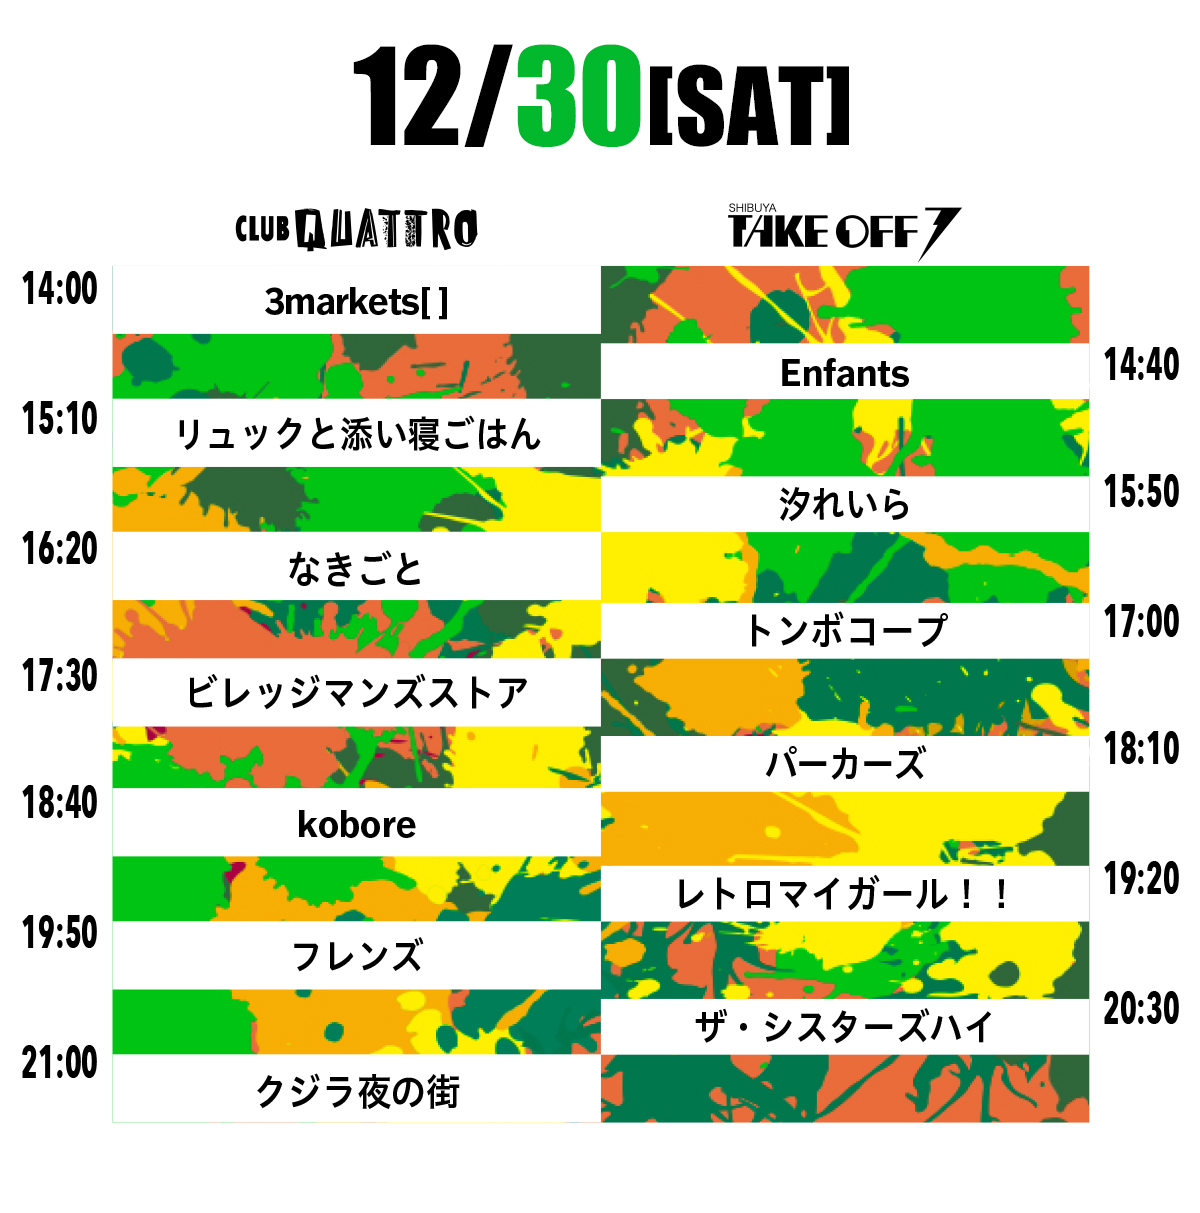 TIME TABLE 12/30